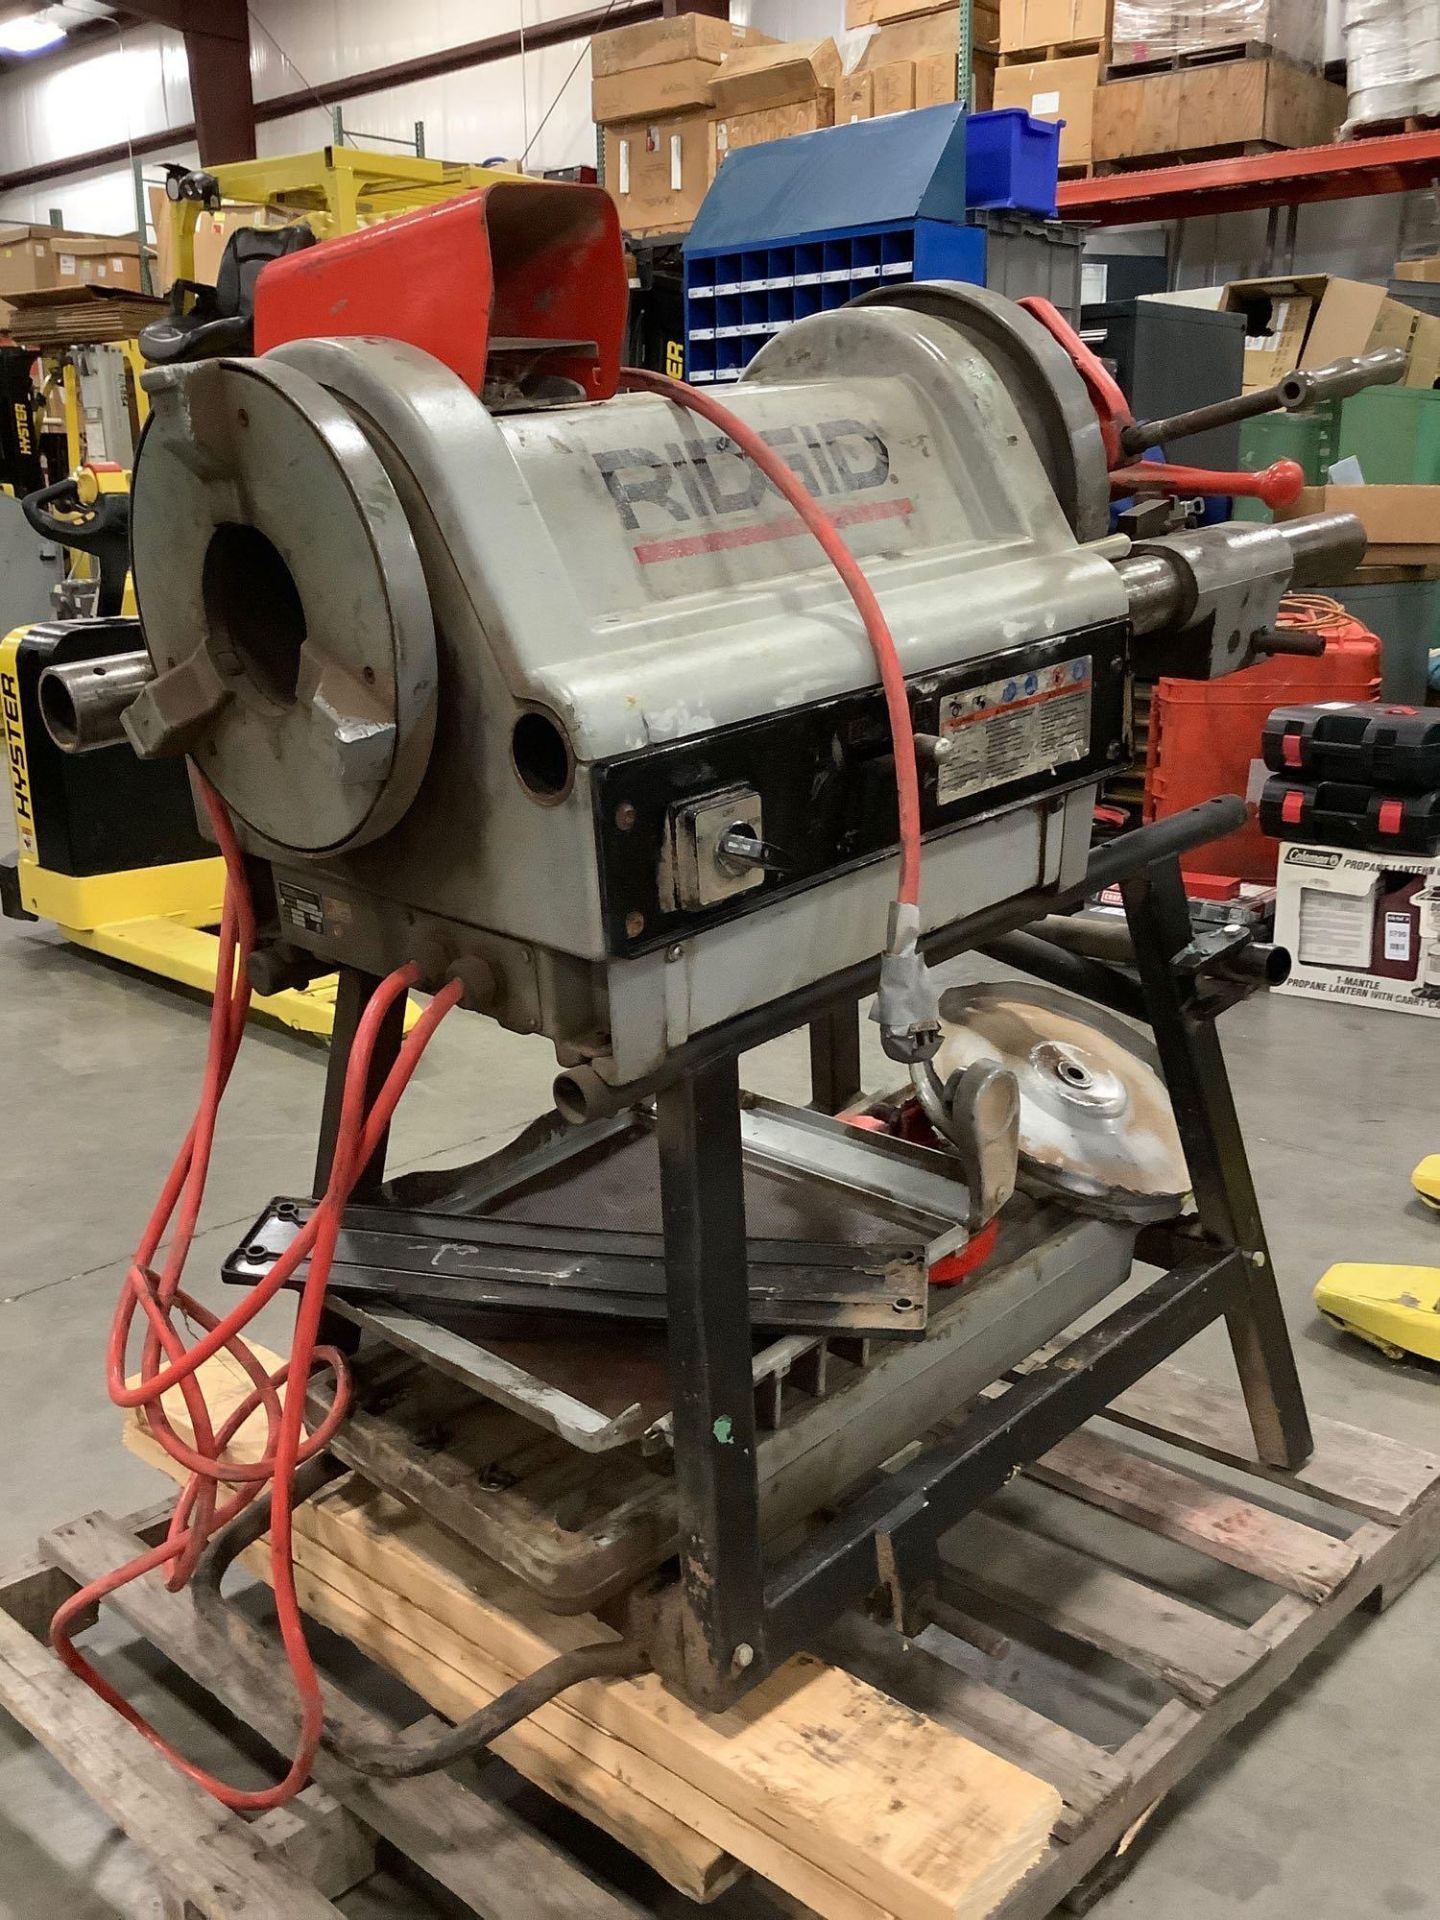 2018 ELECTRIC RIDGID PIPE THREADER MODEL 1224 WITH STAND, APPROX 120 VOLTS,APPROX AMP 15,APPROX HZ 6 - Image 2 of 8